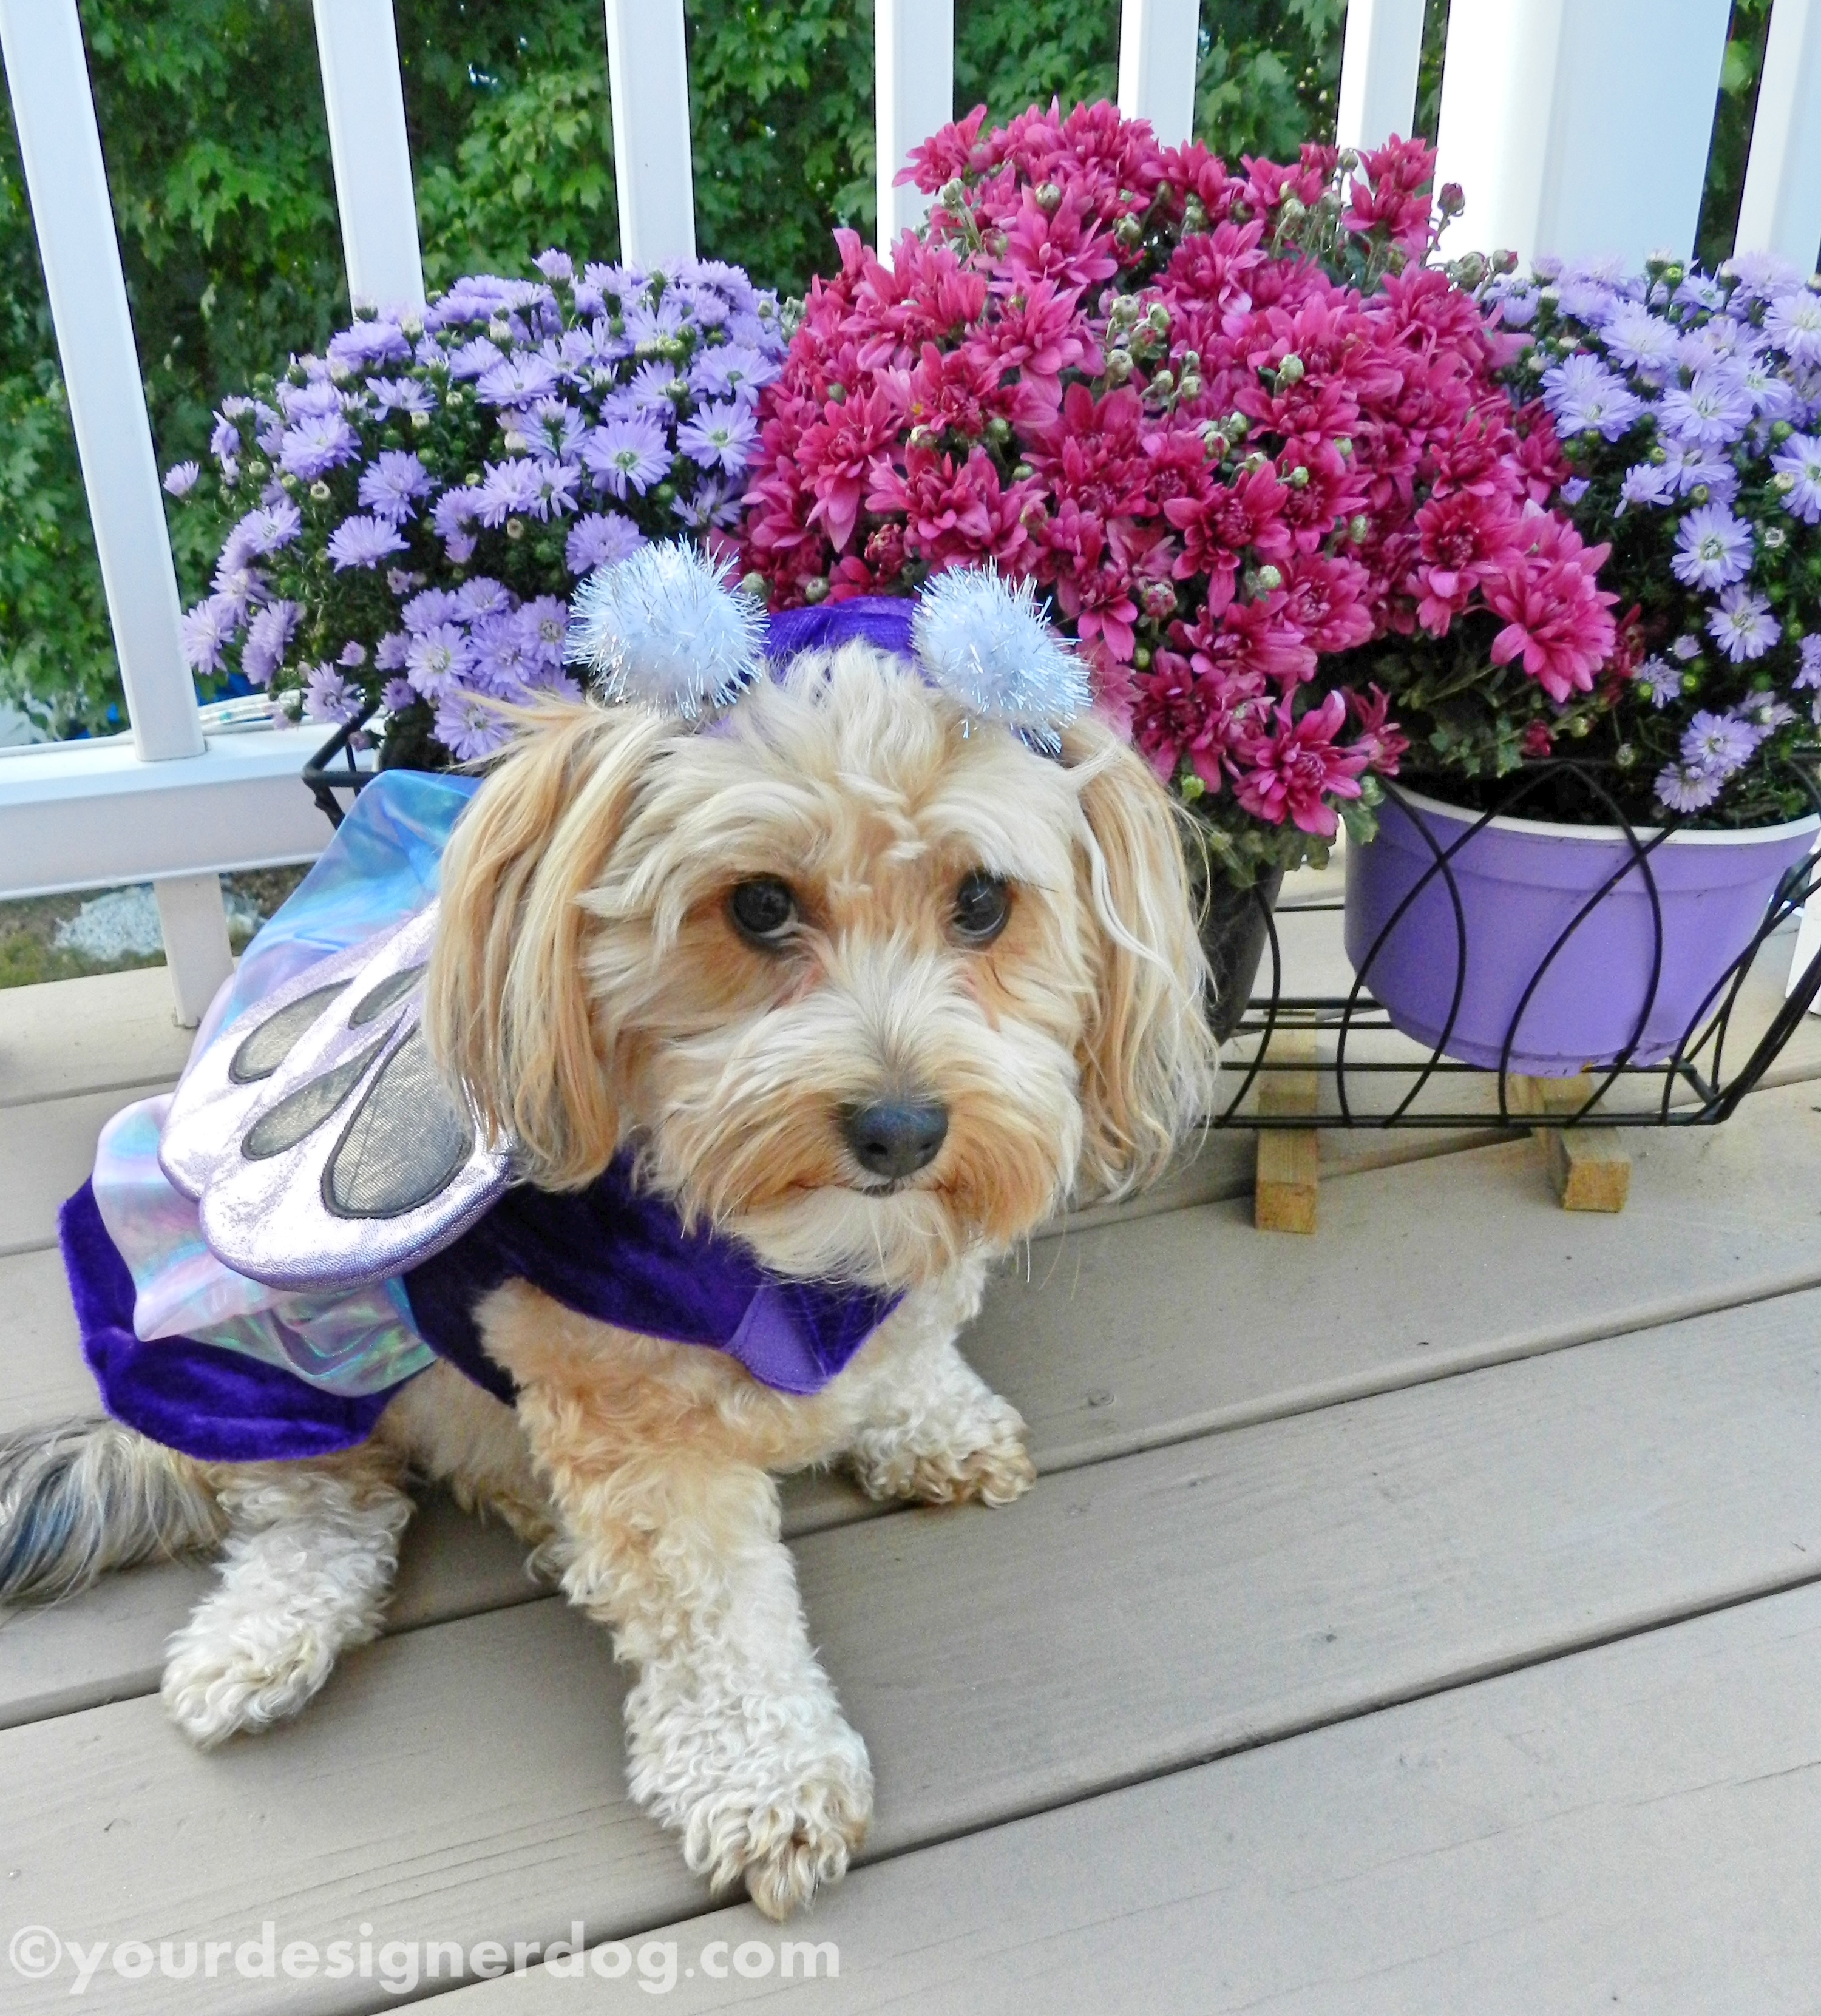 dogs, designer dogs, butterfly, dog costume, dogs with flowers